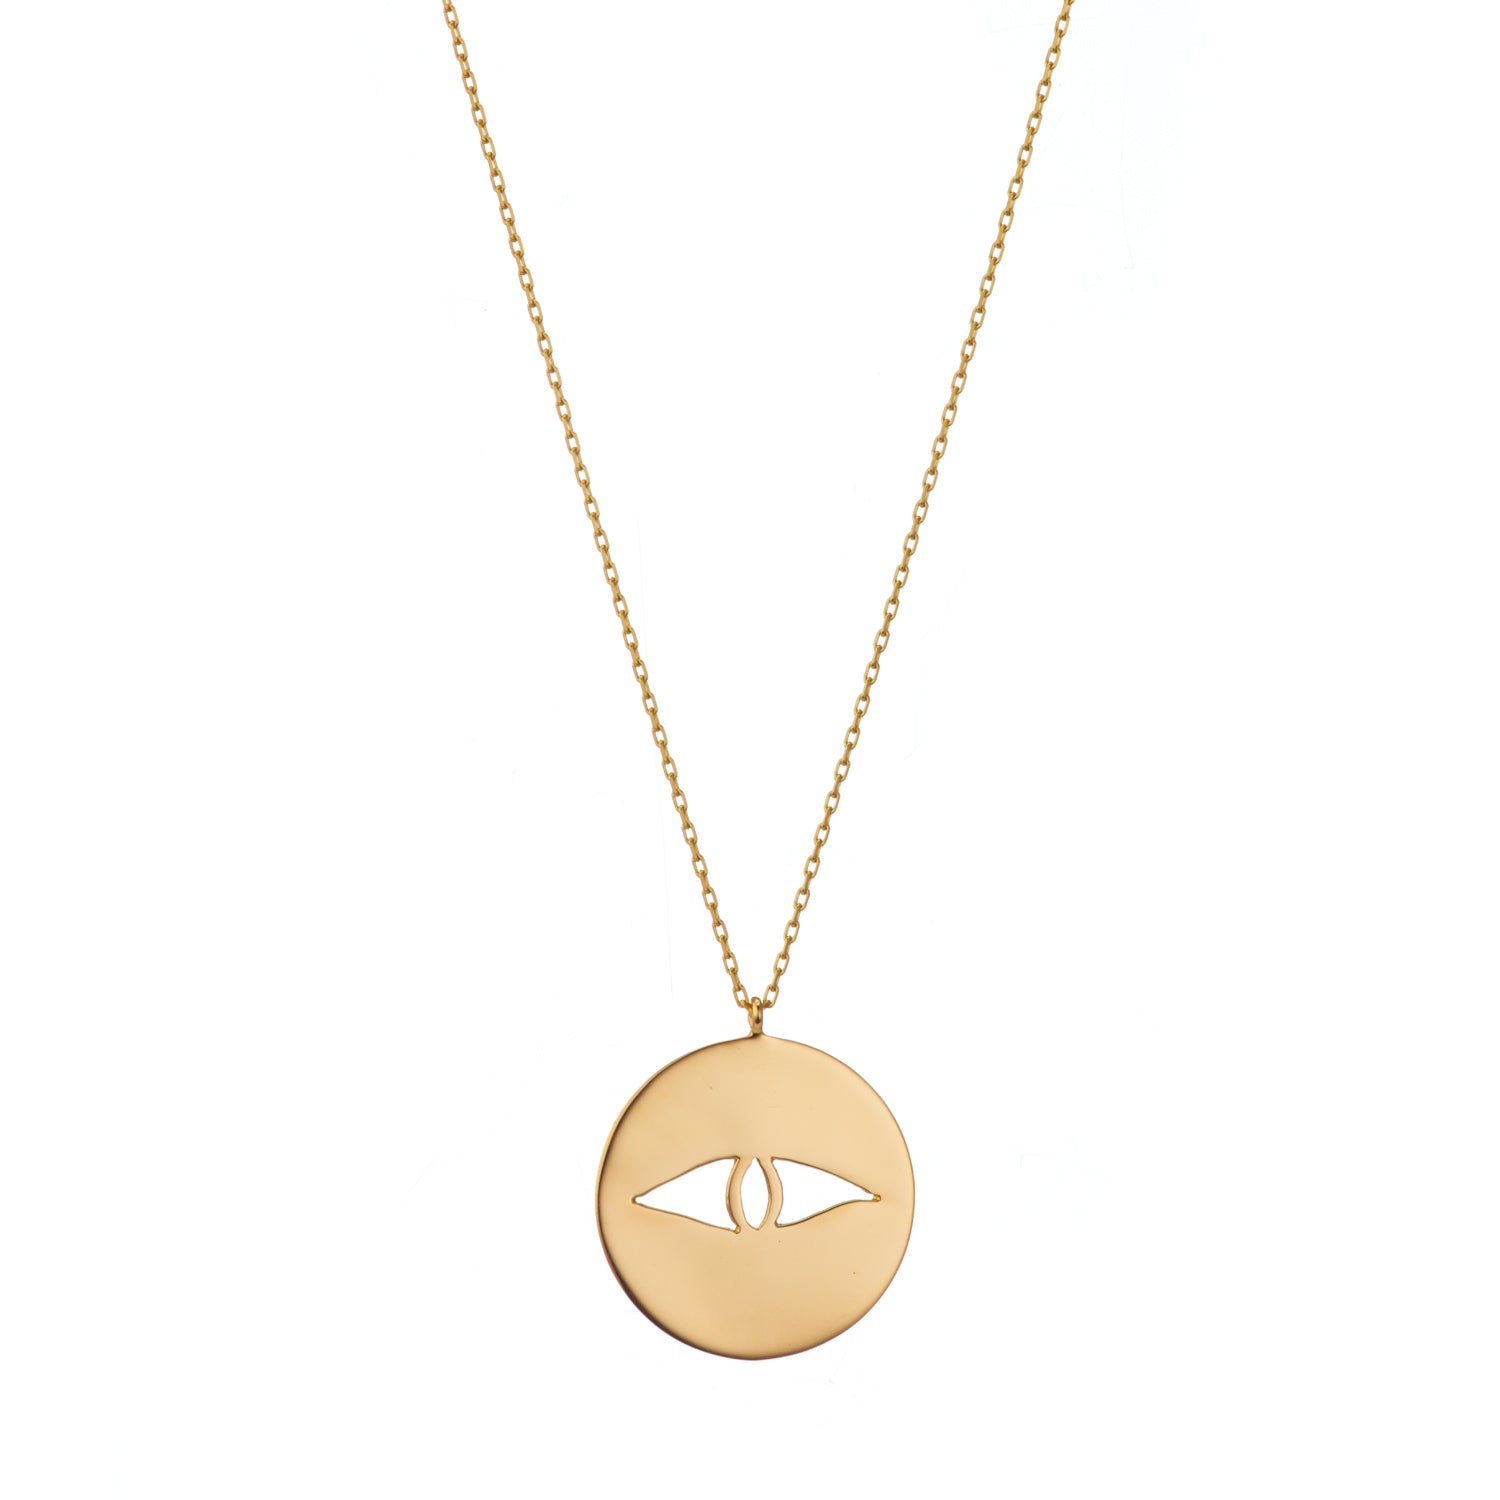 thin gold necklace with pendant